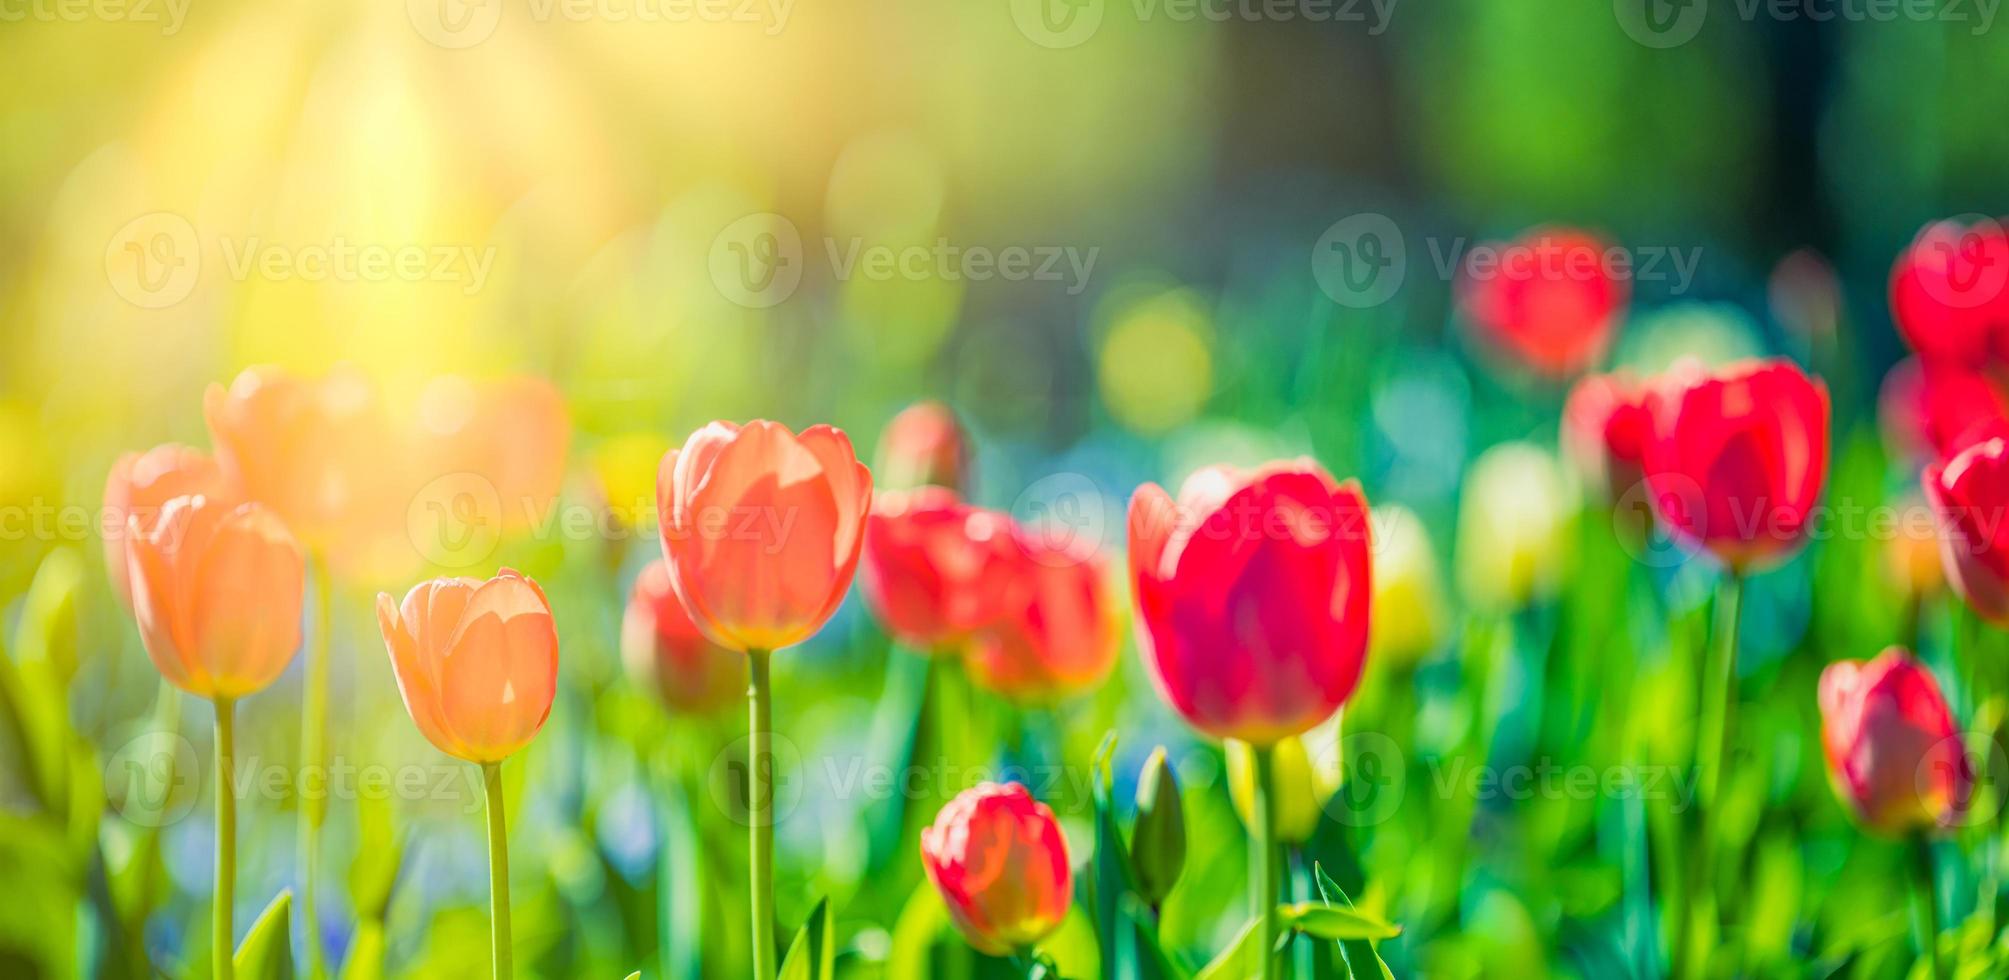 Beautiful bouquet panorama of red white and pink tulips in spring nature for card design and web banner. Serene closeup, idyllic romantic love floral nature landscape. Abstract blurred lush foliage photo